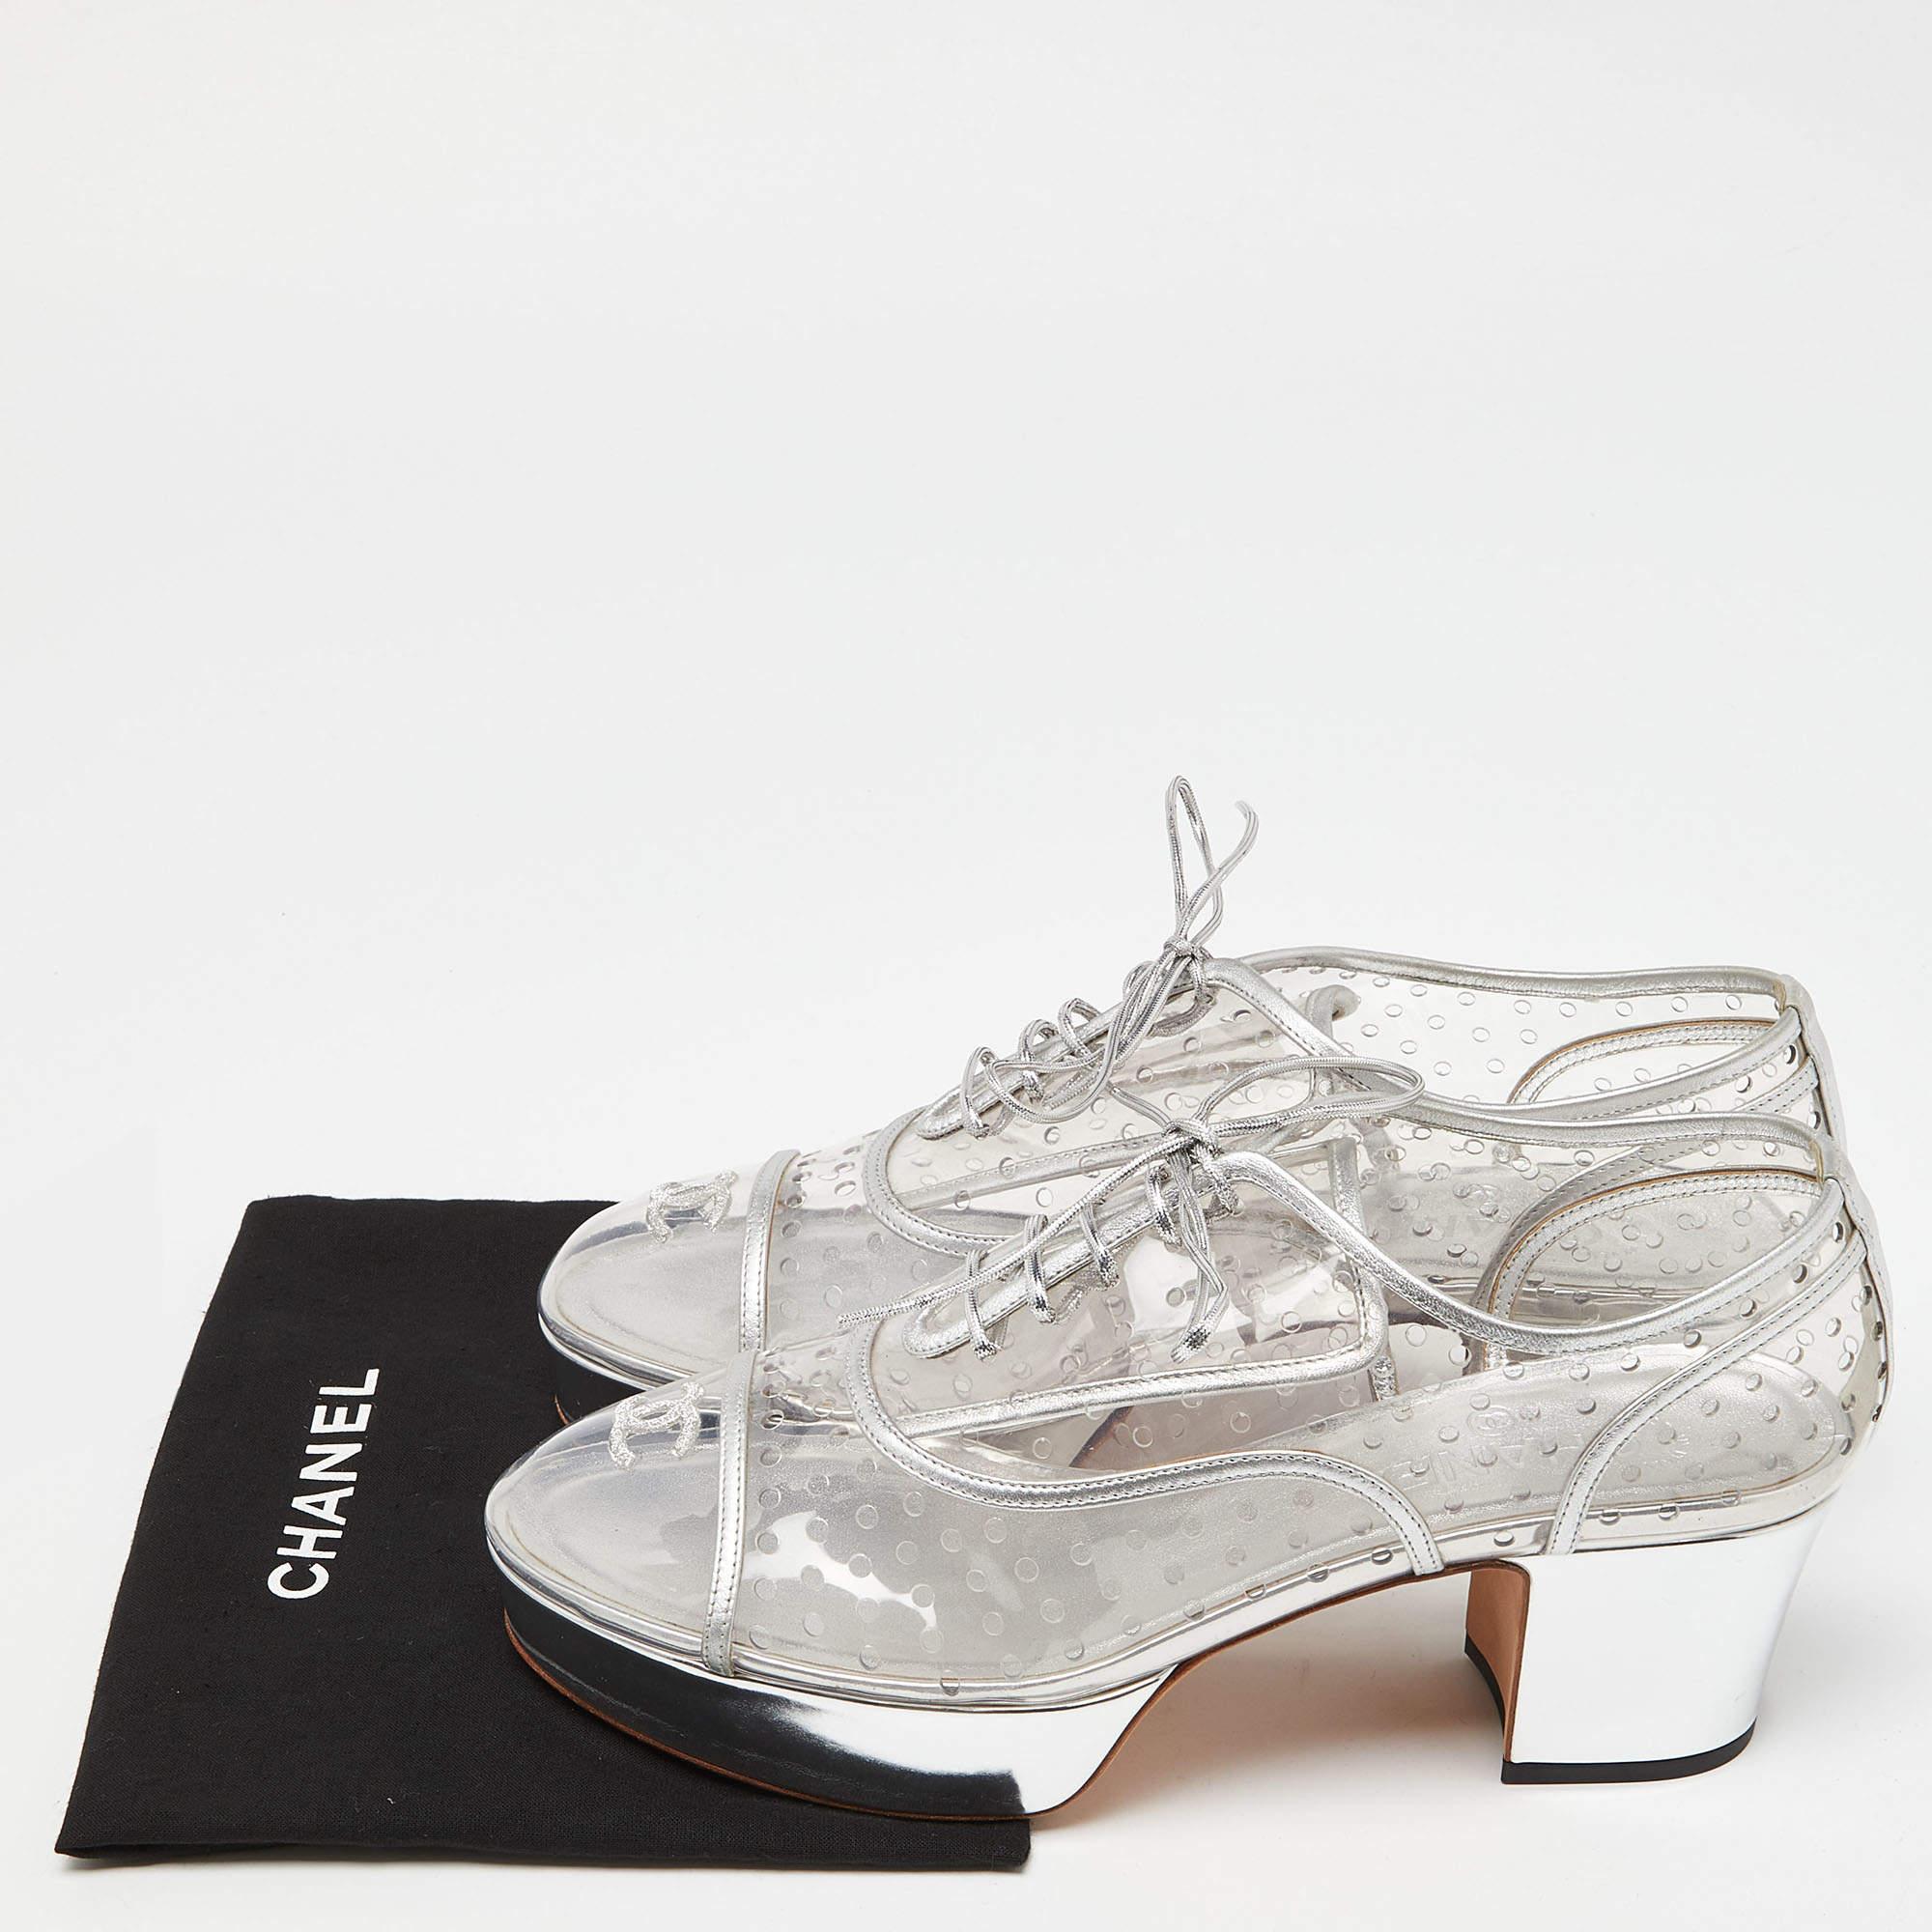 Chanel Transparent/Silver Pvc and Leather CC Block Heel Lace Up Platform Size 41 For Sale 9